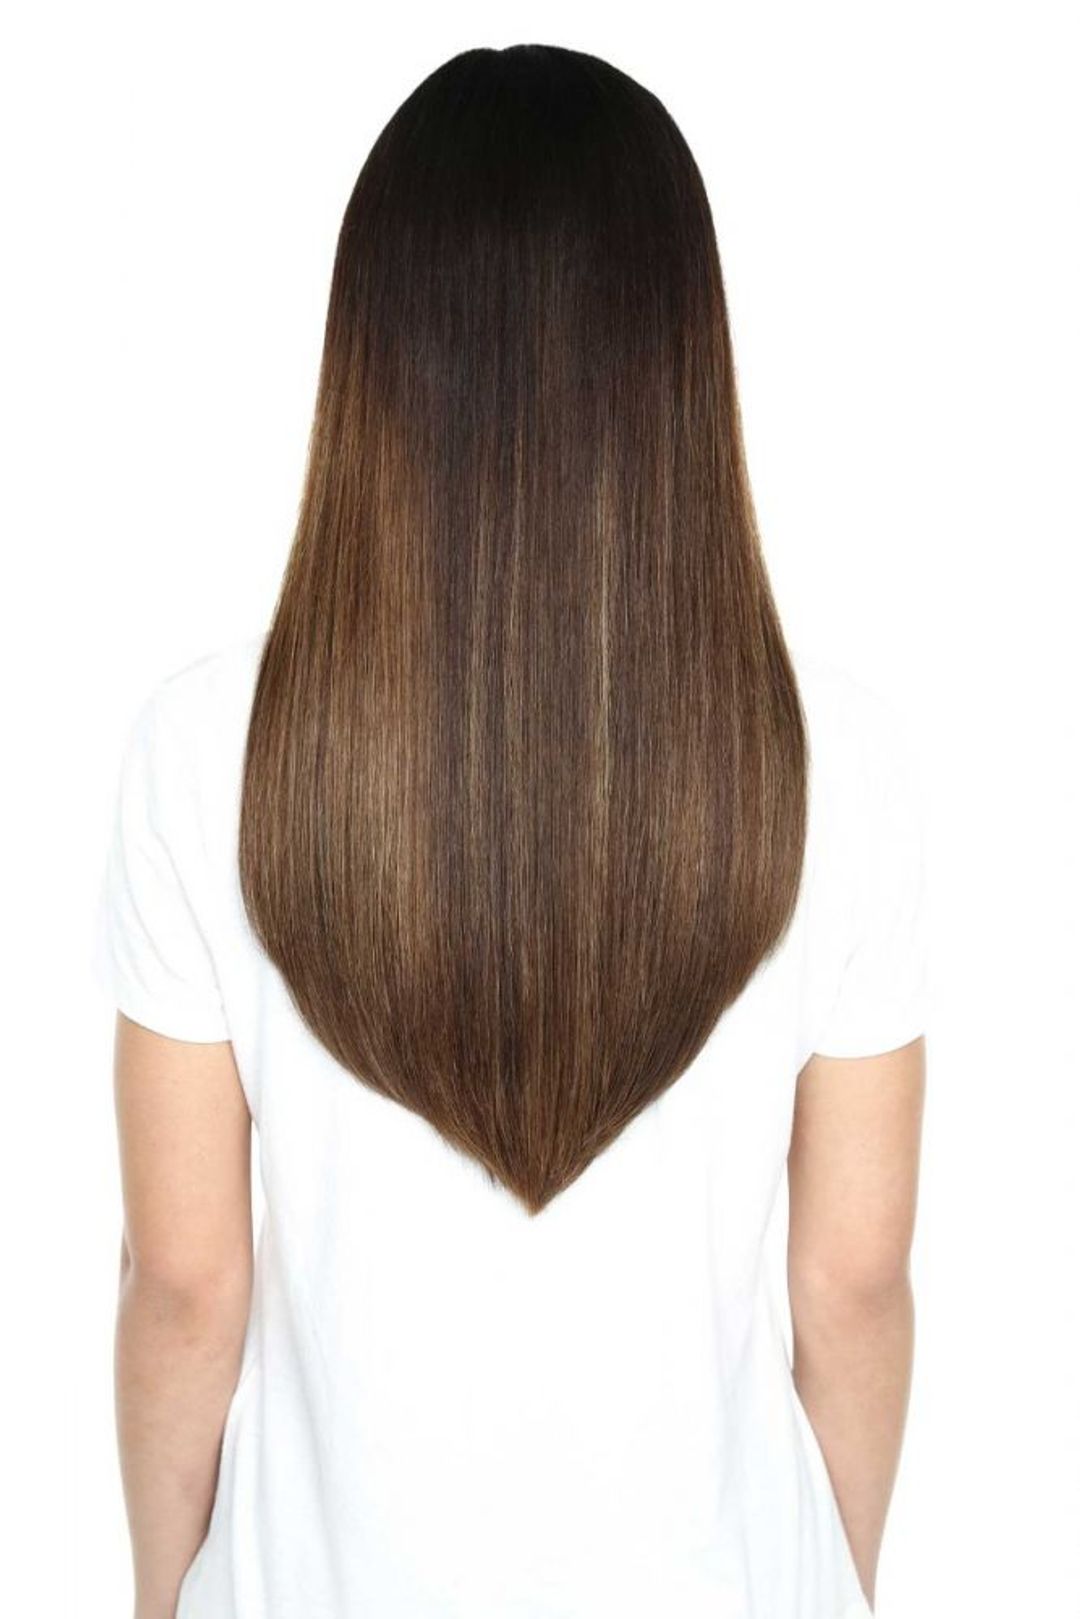 Beauty Works Gold Double Weft Extensions - Pure Platinum,18"